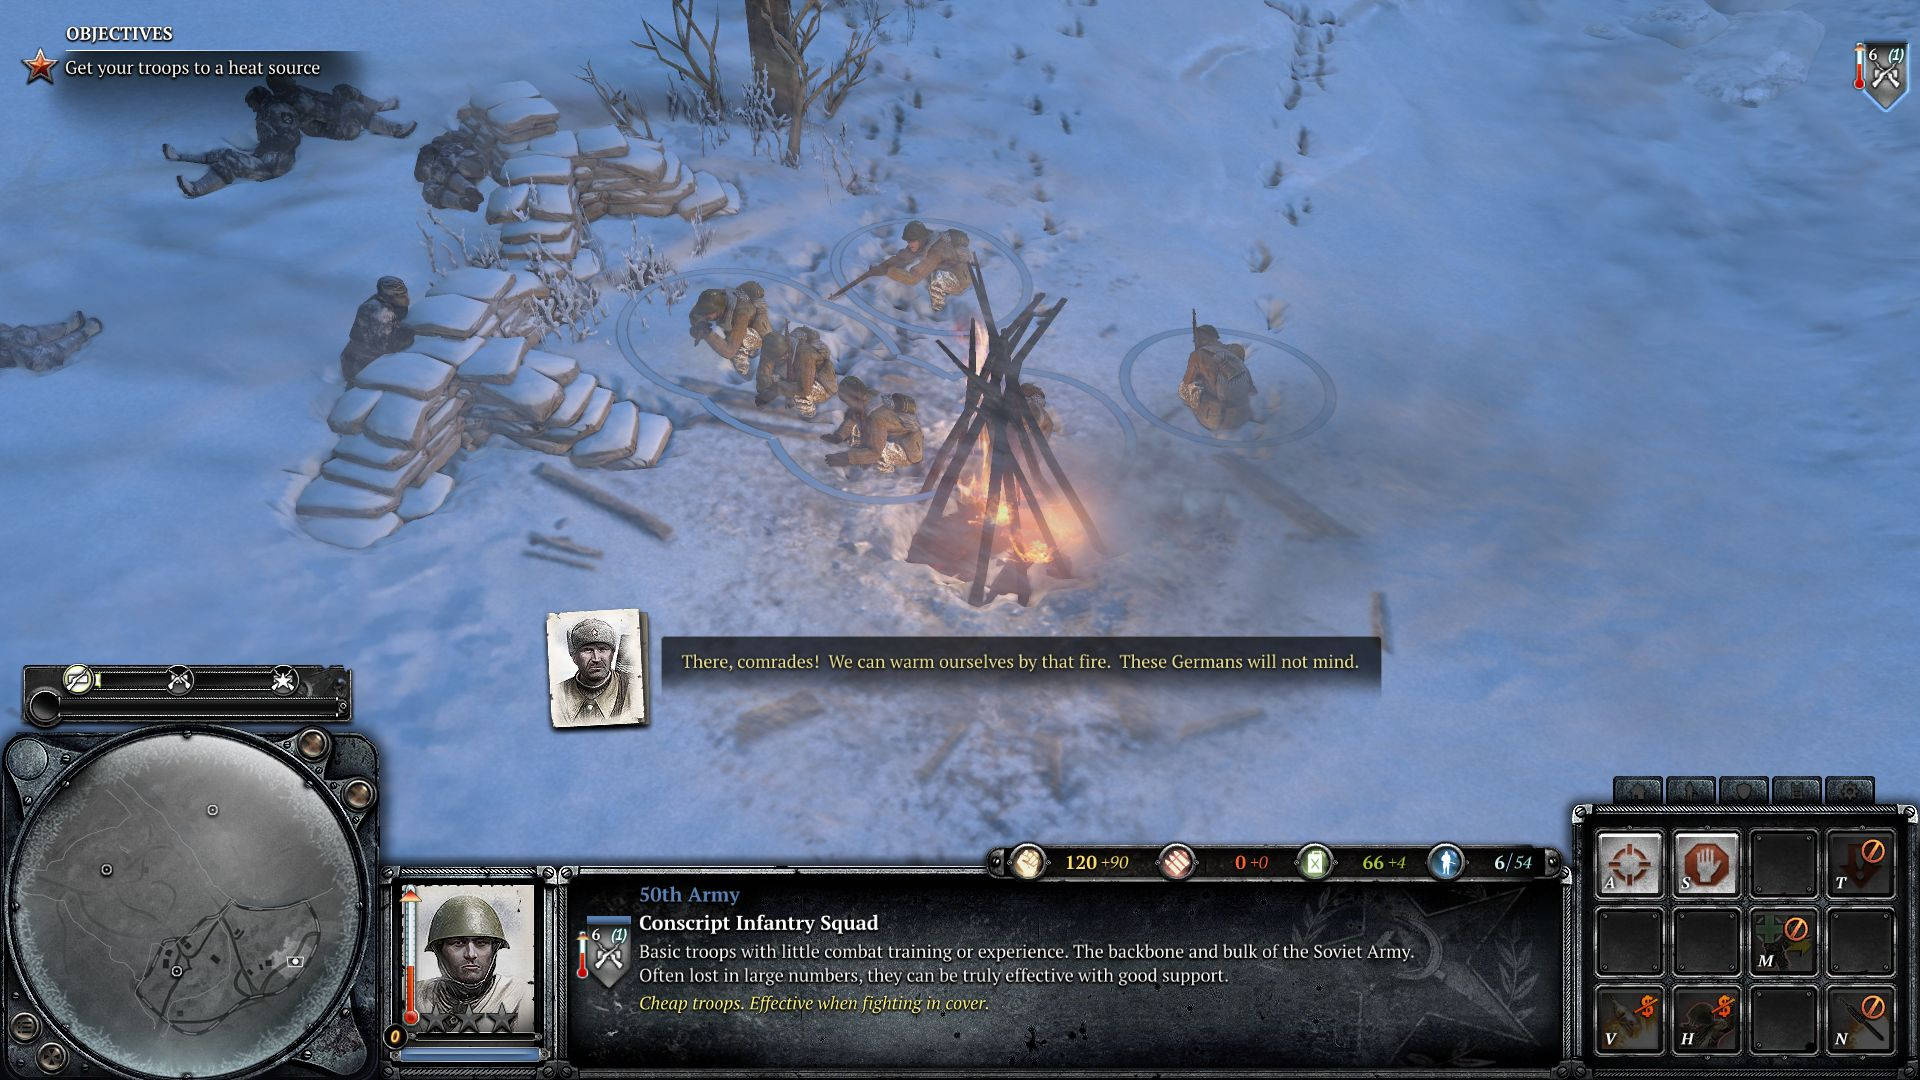 Company Of Heroes 2 50th Army Bonfire Background